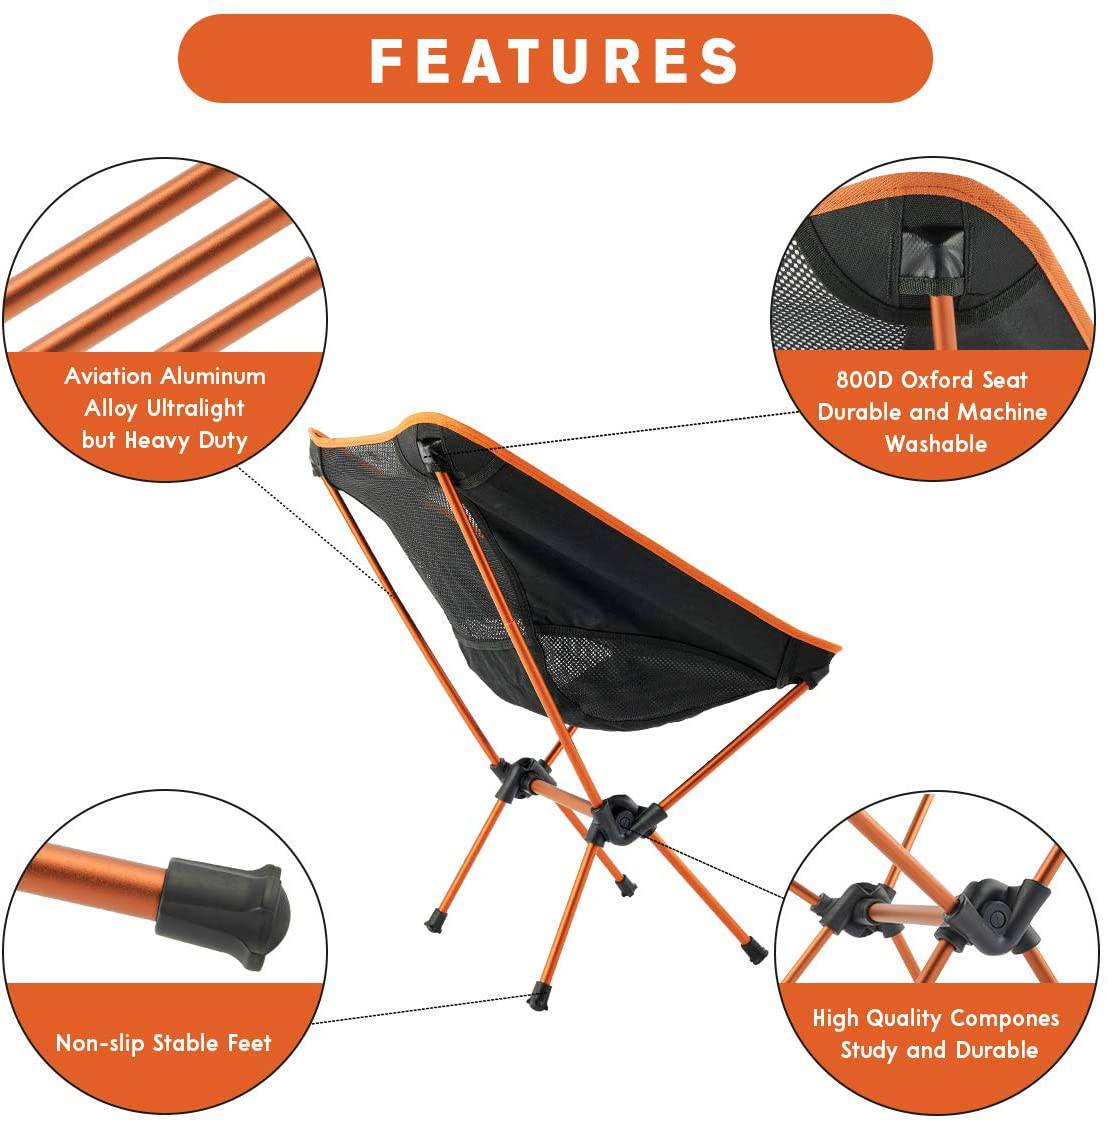 Portable Camping Lightweight Chair : Outdoors Freestyle Rocker  With Carry Bag 330lbs - SKINMOZ MARKET